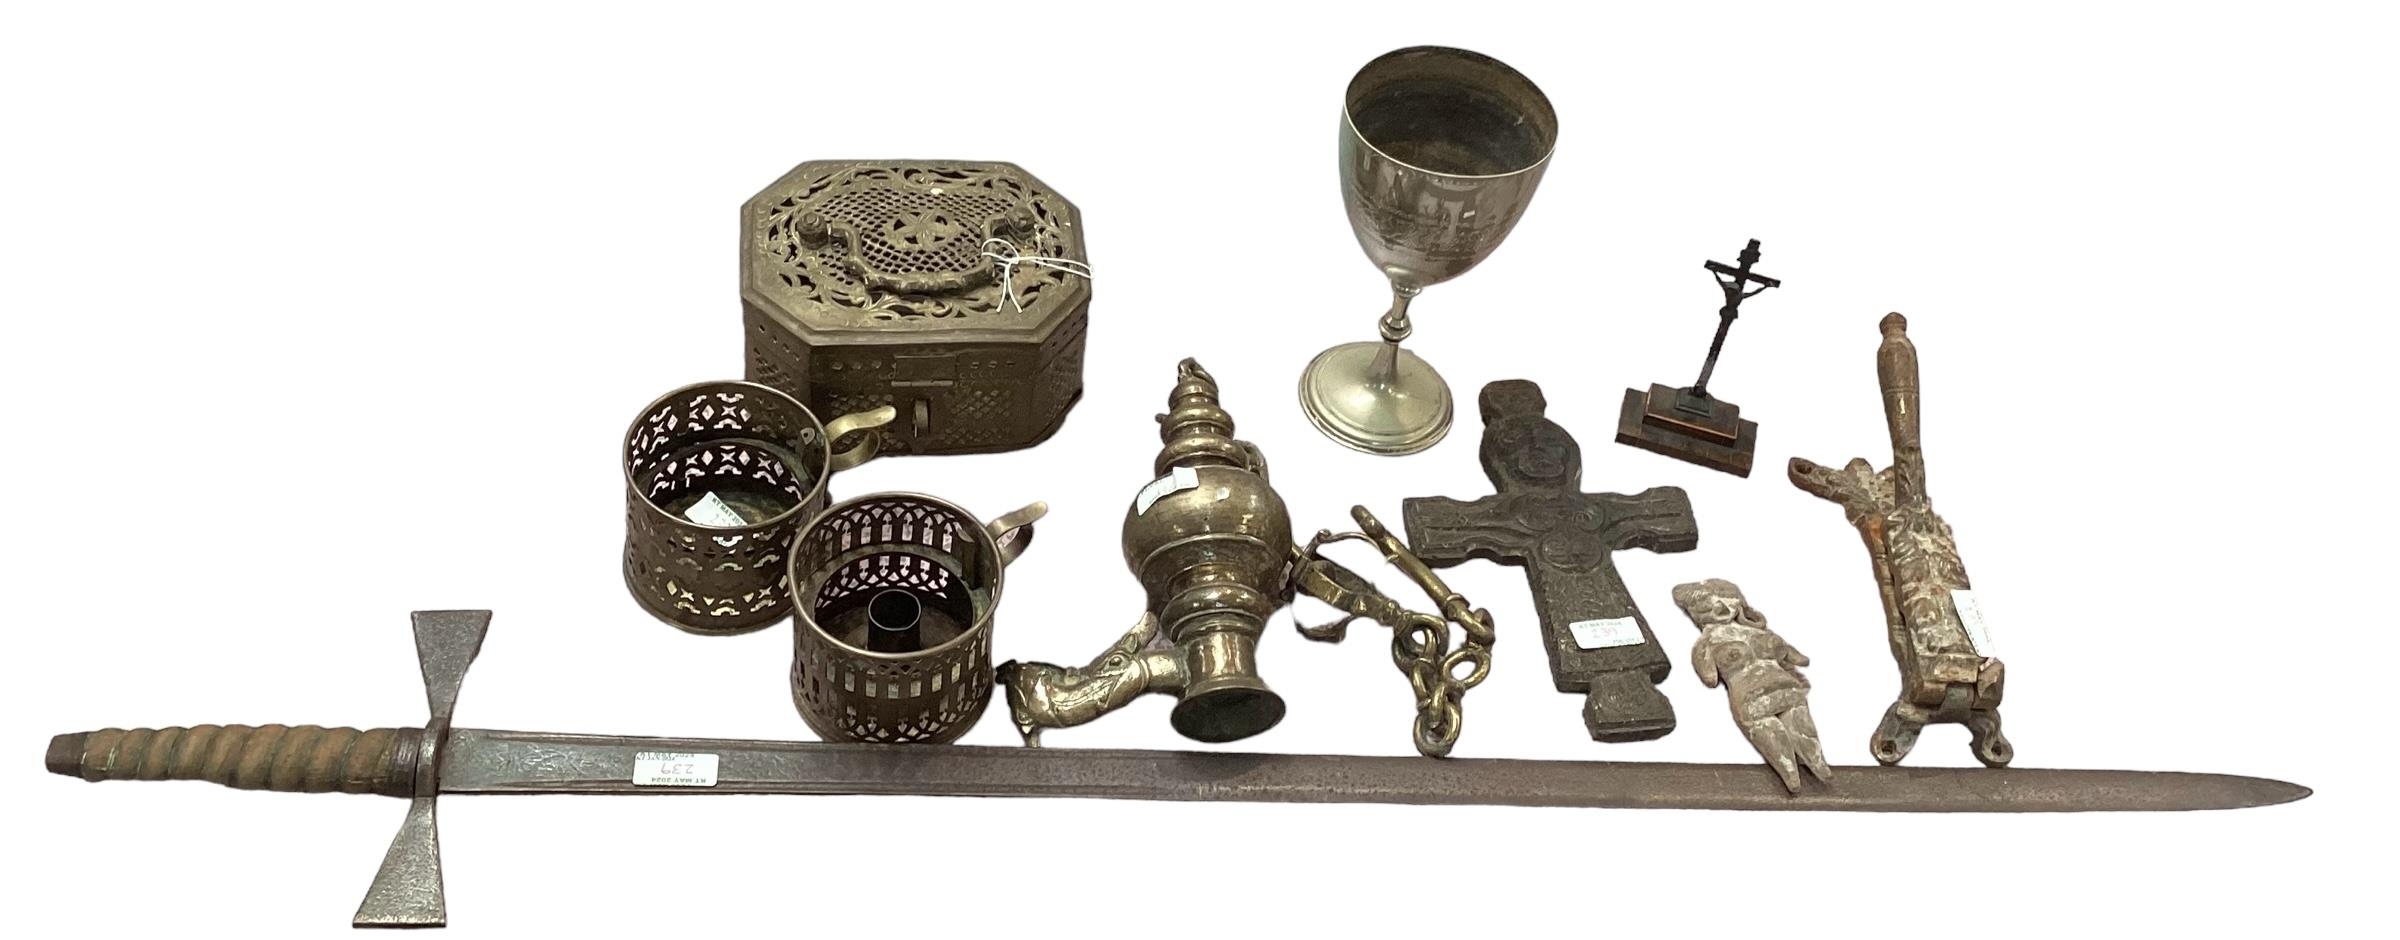 A quantity of metal wares to include a sword, a pierced casket, crucifix etc, see all images, Fawley